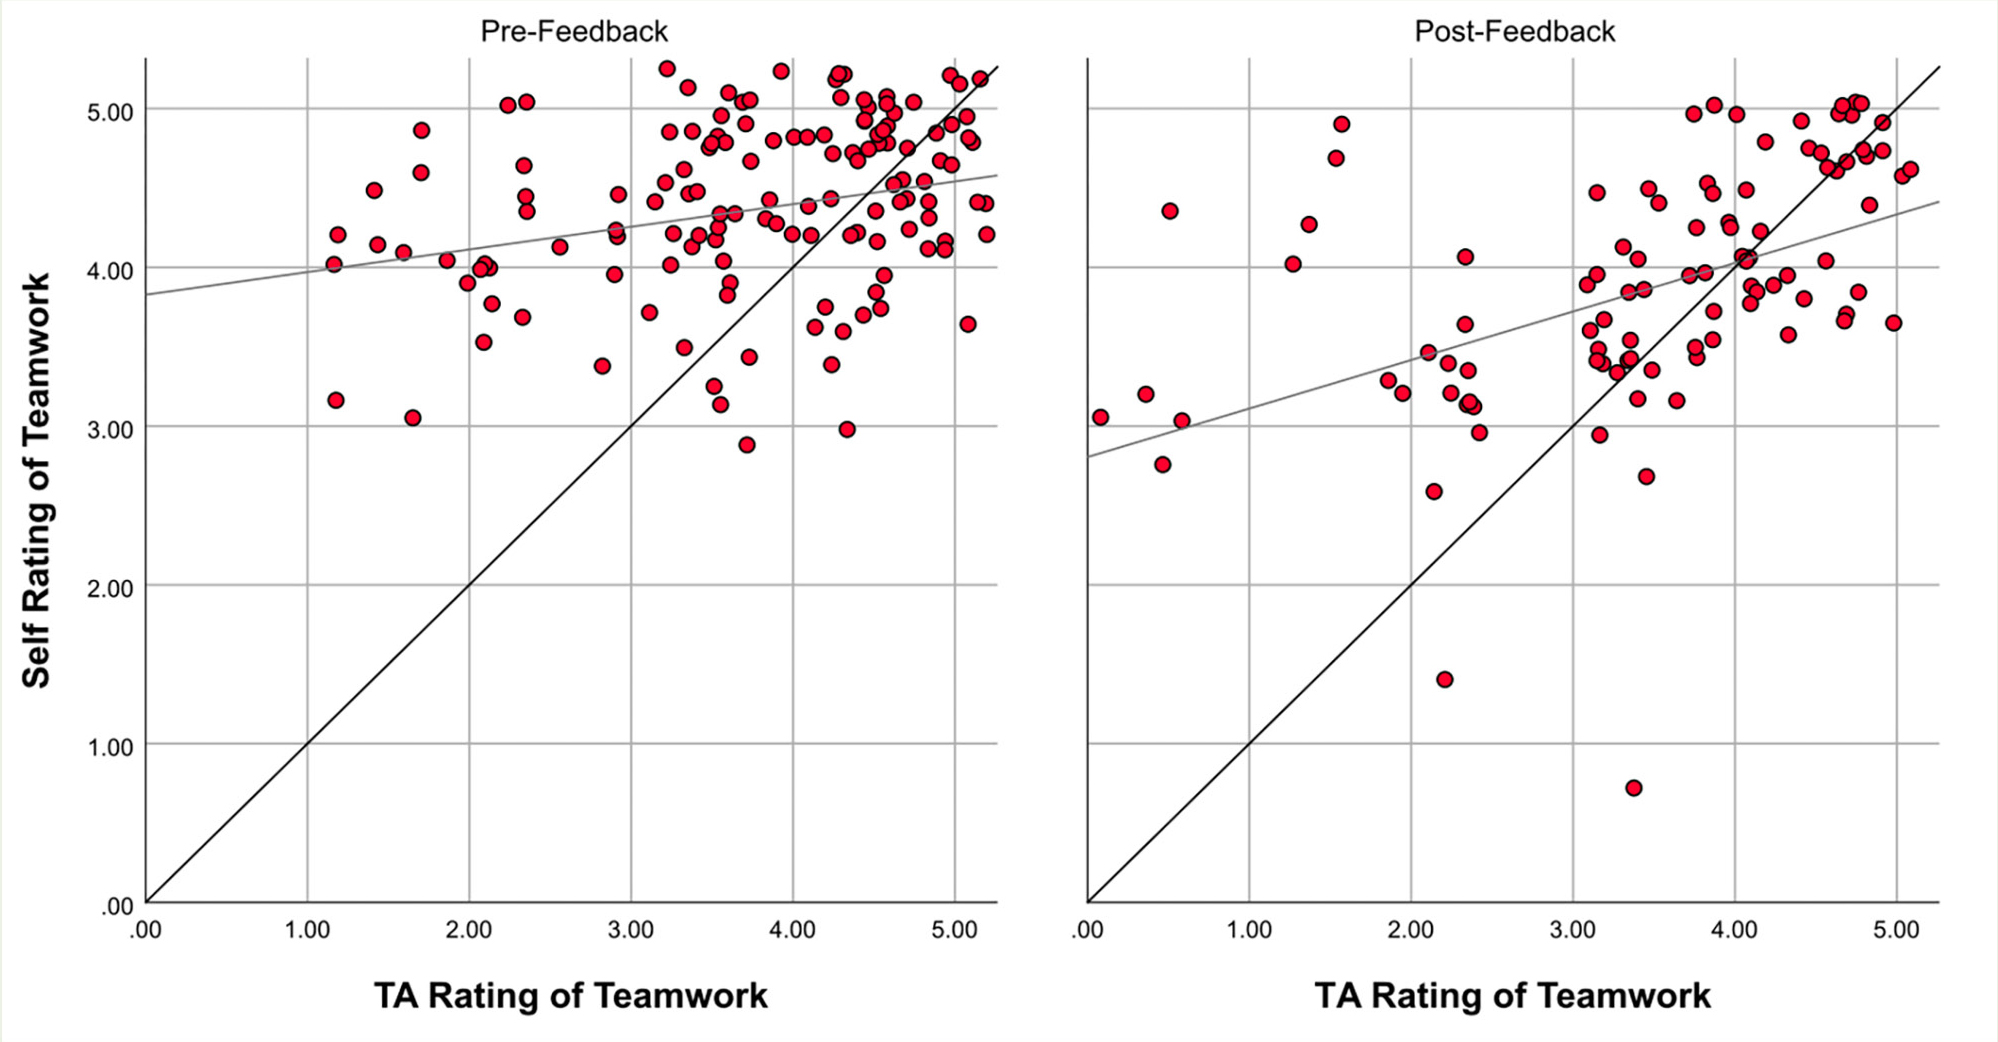 Accuracy of student self-assessments relative to the UTA assessments. Each red dot represents one student’s self-assessment versus the UTA assessment. The solid black line represents perfect agreement (y = x), and the lighter black line is a line of best fit for the red dots.